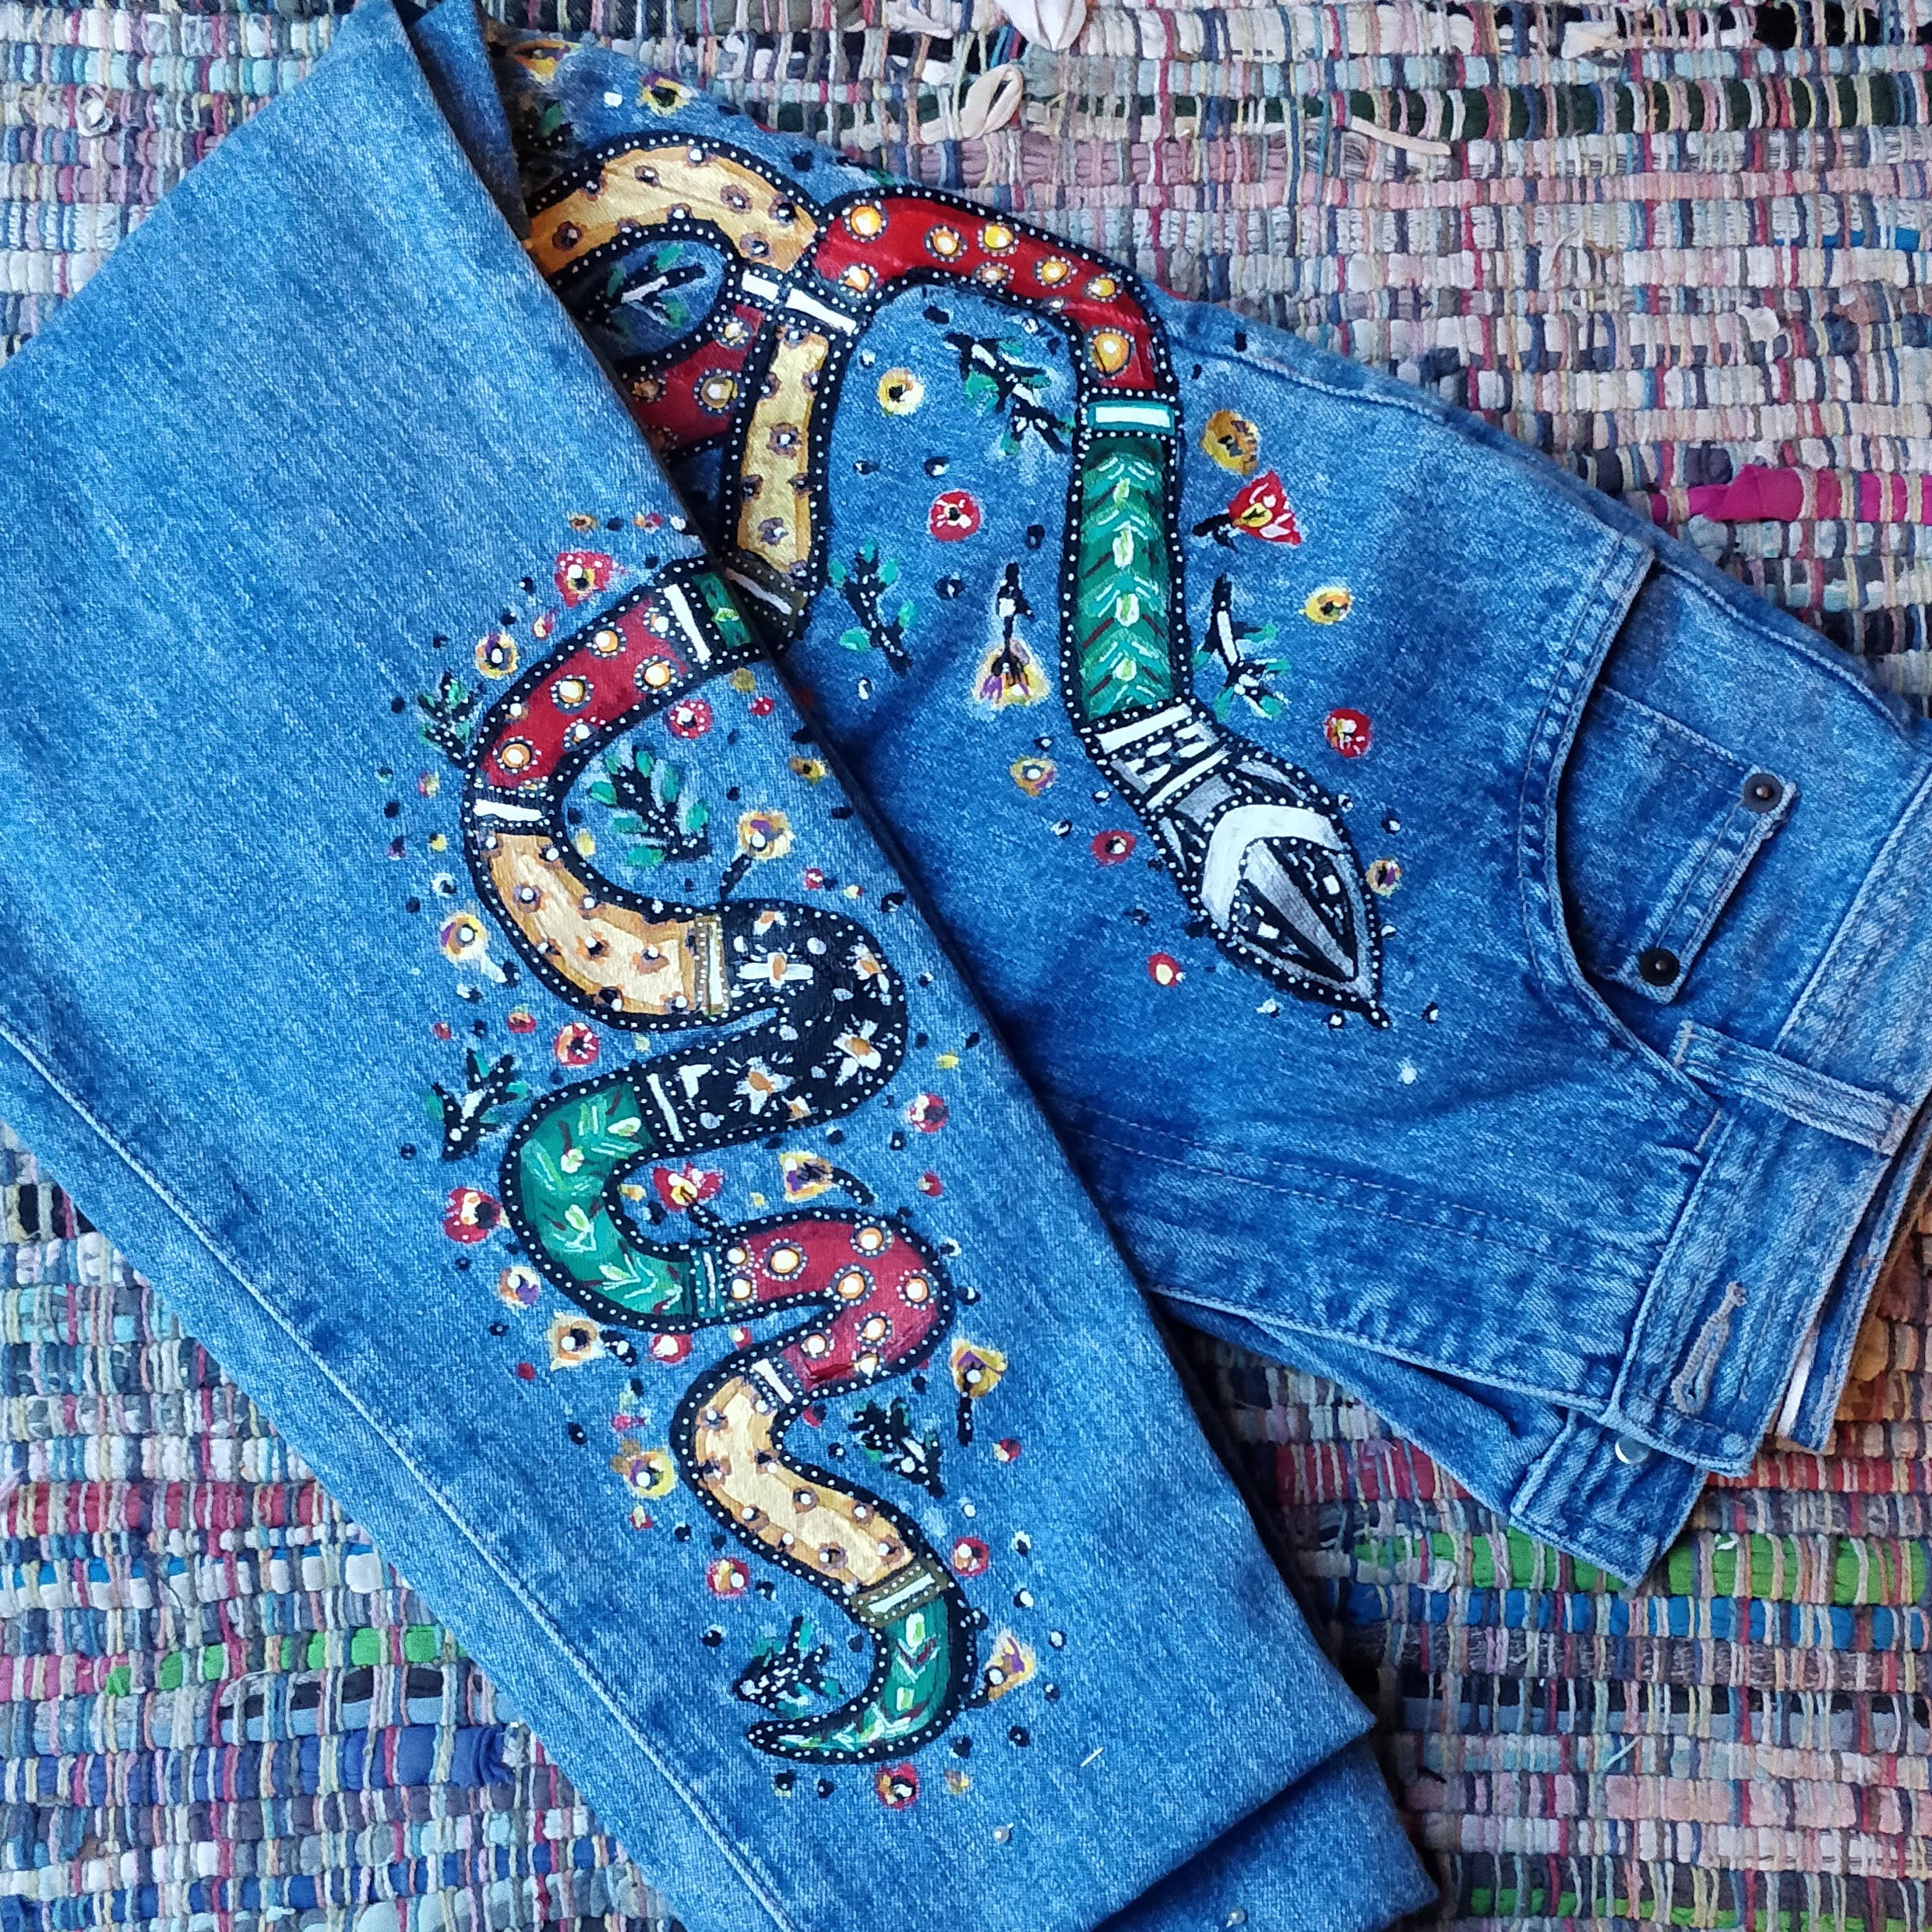 Hand Painted Jeans, High Waist, Embroidery Denim | Rebecca Bessette